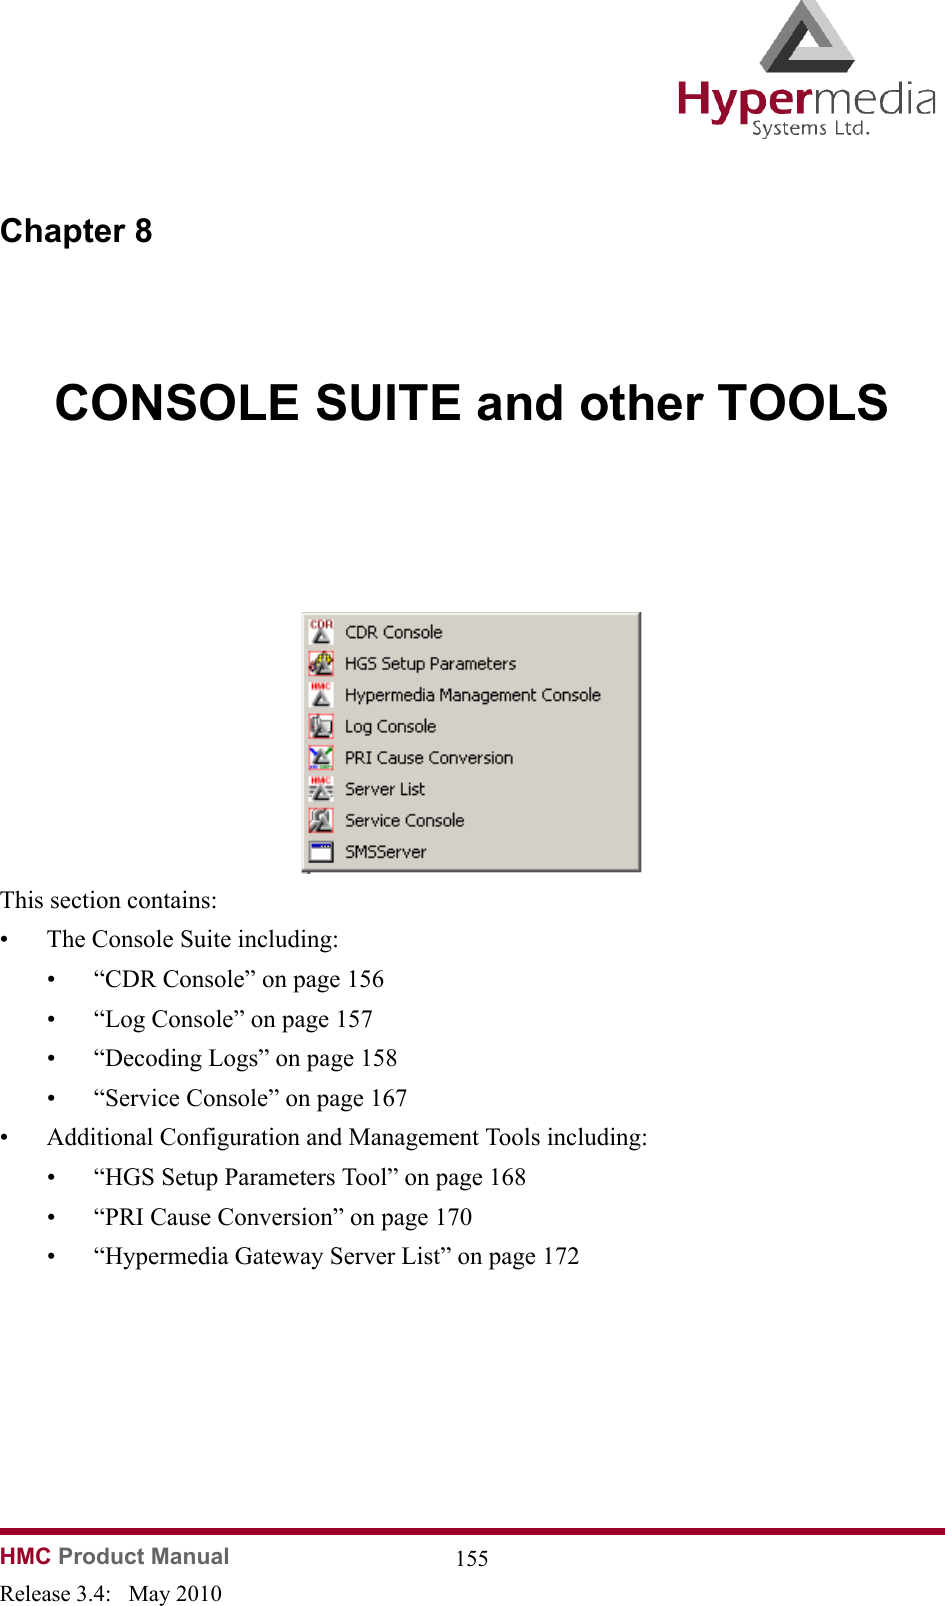 HMC Product Manual  155Release 3.4:   May 2010Chapter 8CONSOLE SUITE and other TOOLS              This section contains:• The Console Suite including:• “CDR Console” on page 156• “Log Console” on page 157• “Decoding Logs” on page 158• “Service Console” on page 167• Additional Configuration and Management Tools including:• “HGS Setup Parameters Tool” on page 168• “PRI Cause Conversion” on page 170• “Hypermedia Gateway Server List” on page 172